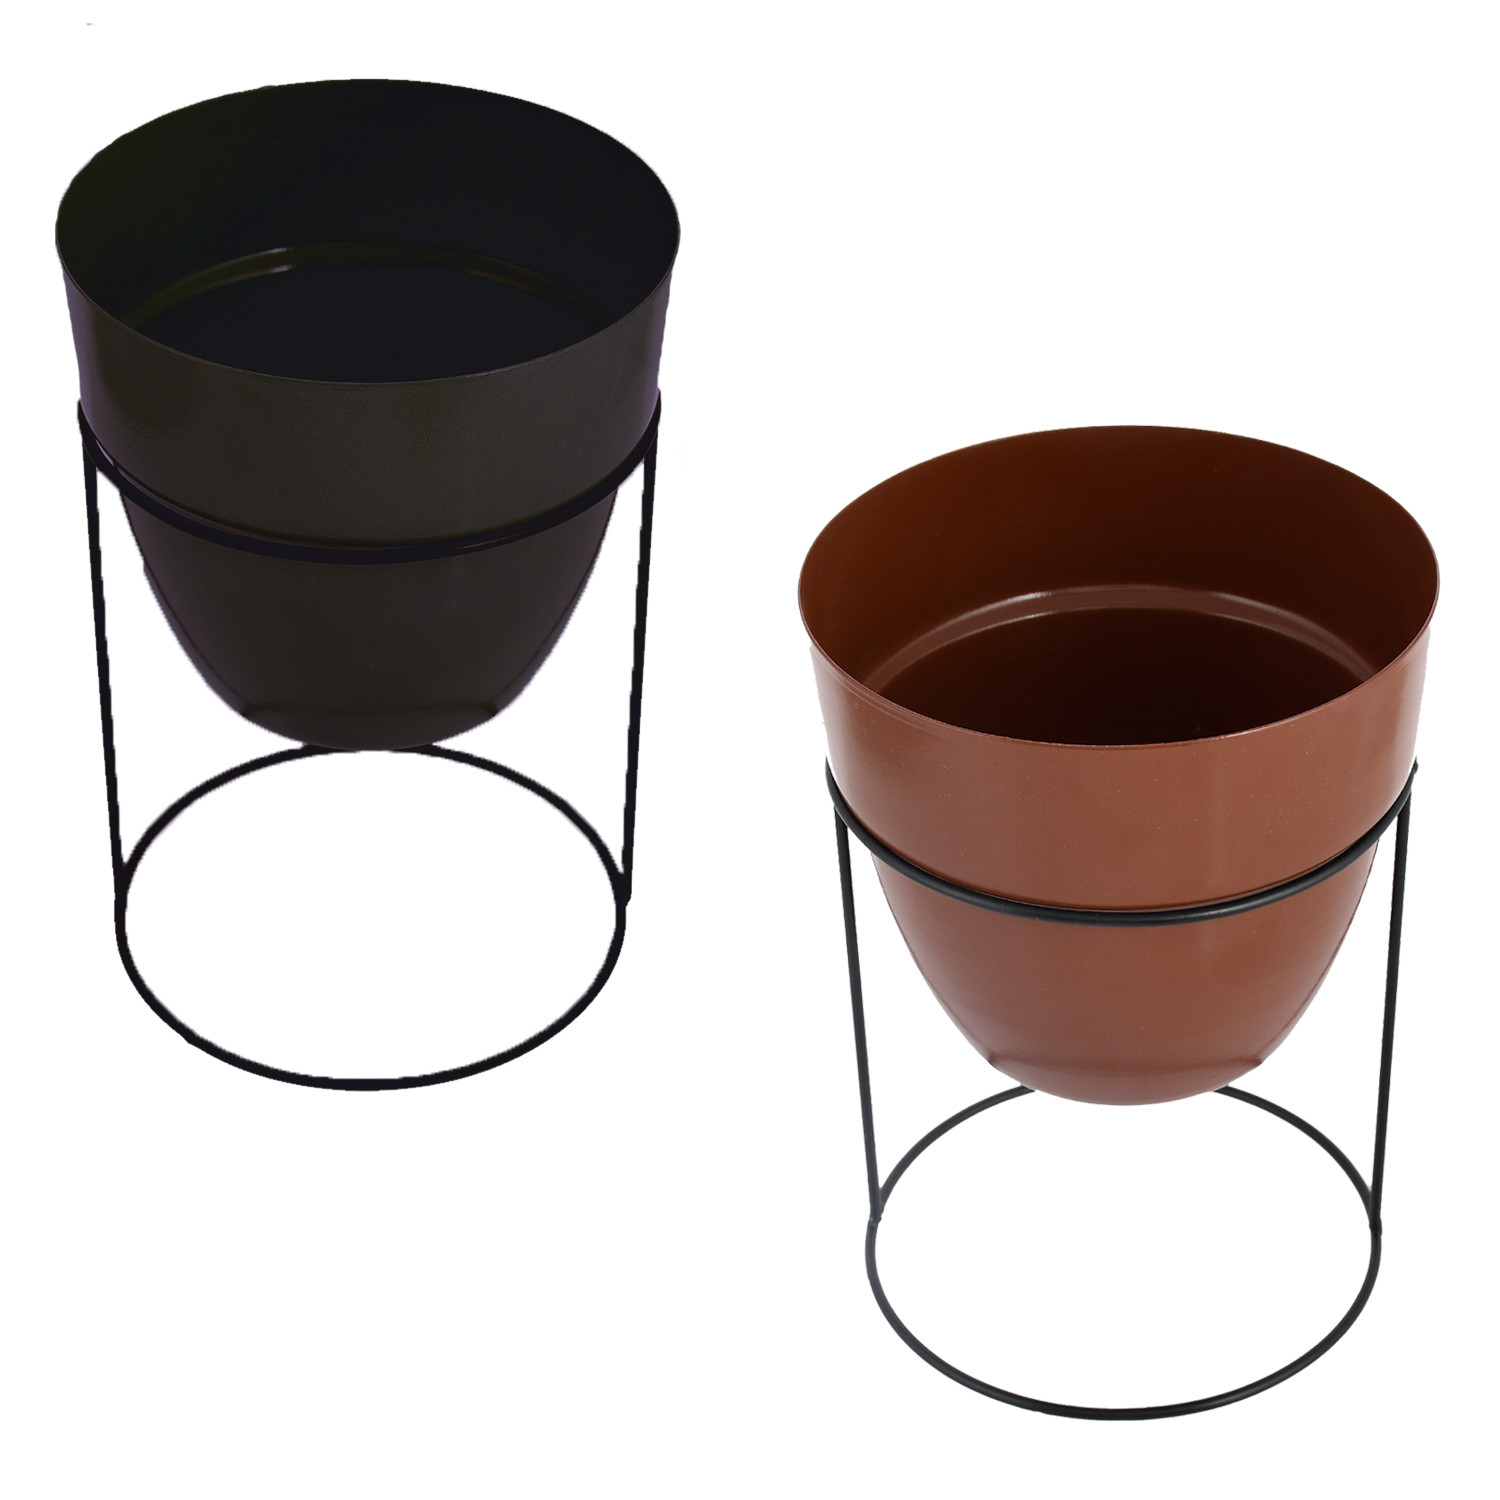 Kuber Industries Metal Planter|Decorative Modern Indoor Desk Pot|Iron Table Stand Flower Planter Pot For Home Décor,8.5 Inches,Pack of 2 (Black & Terracotta)